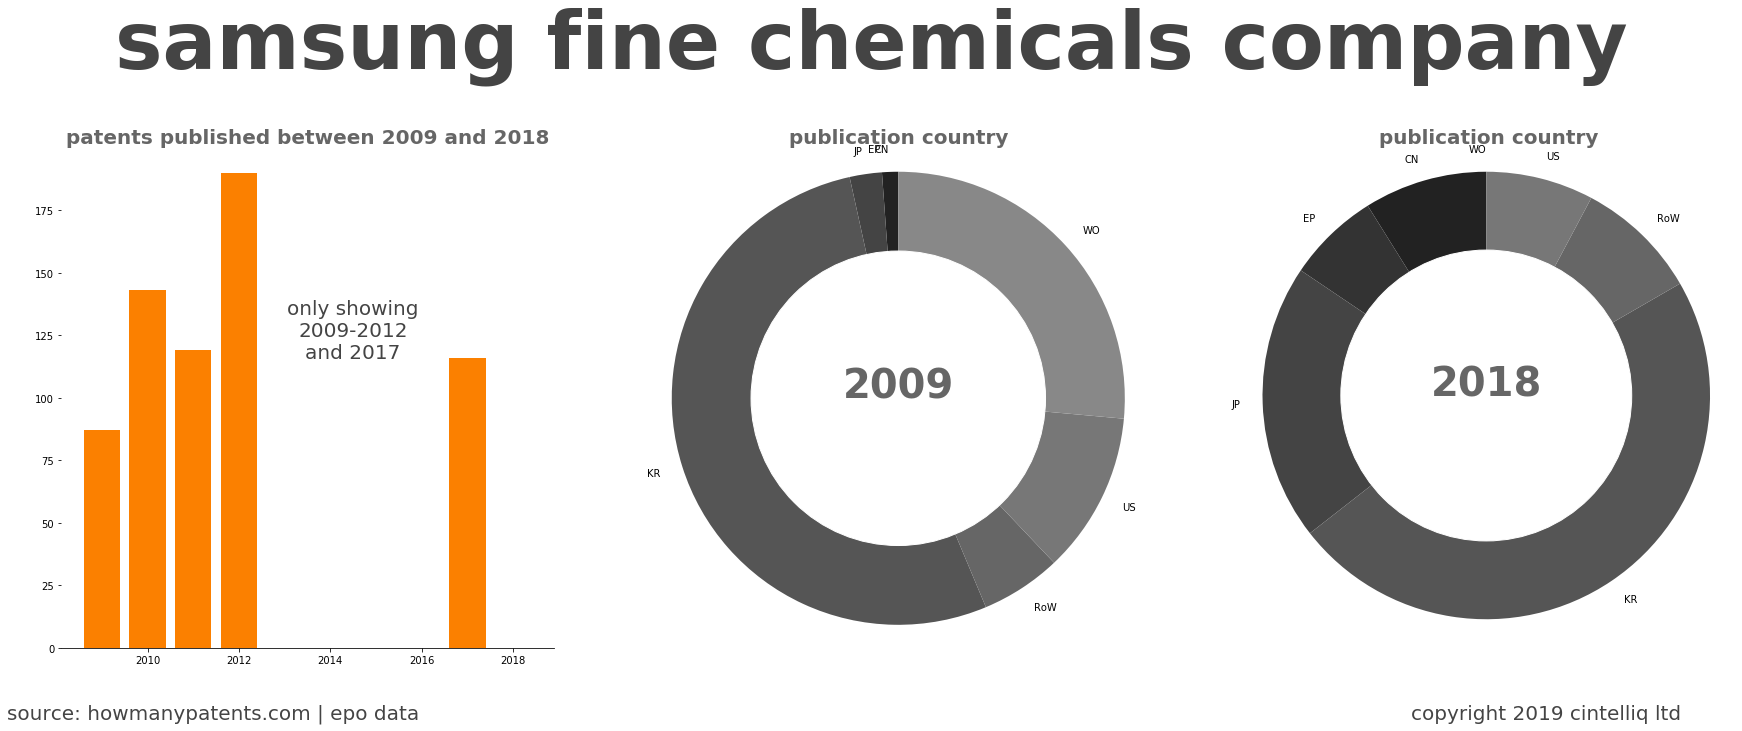 summary of patents for Samsung Fine Chemicals Company